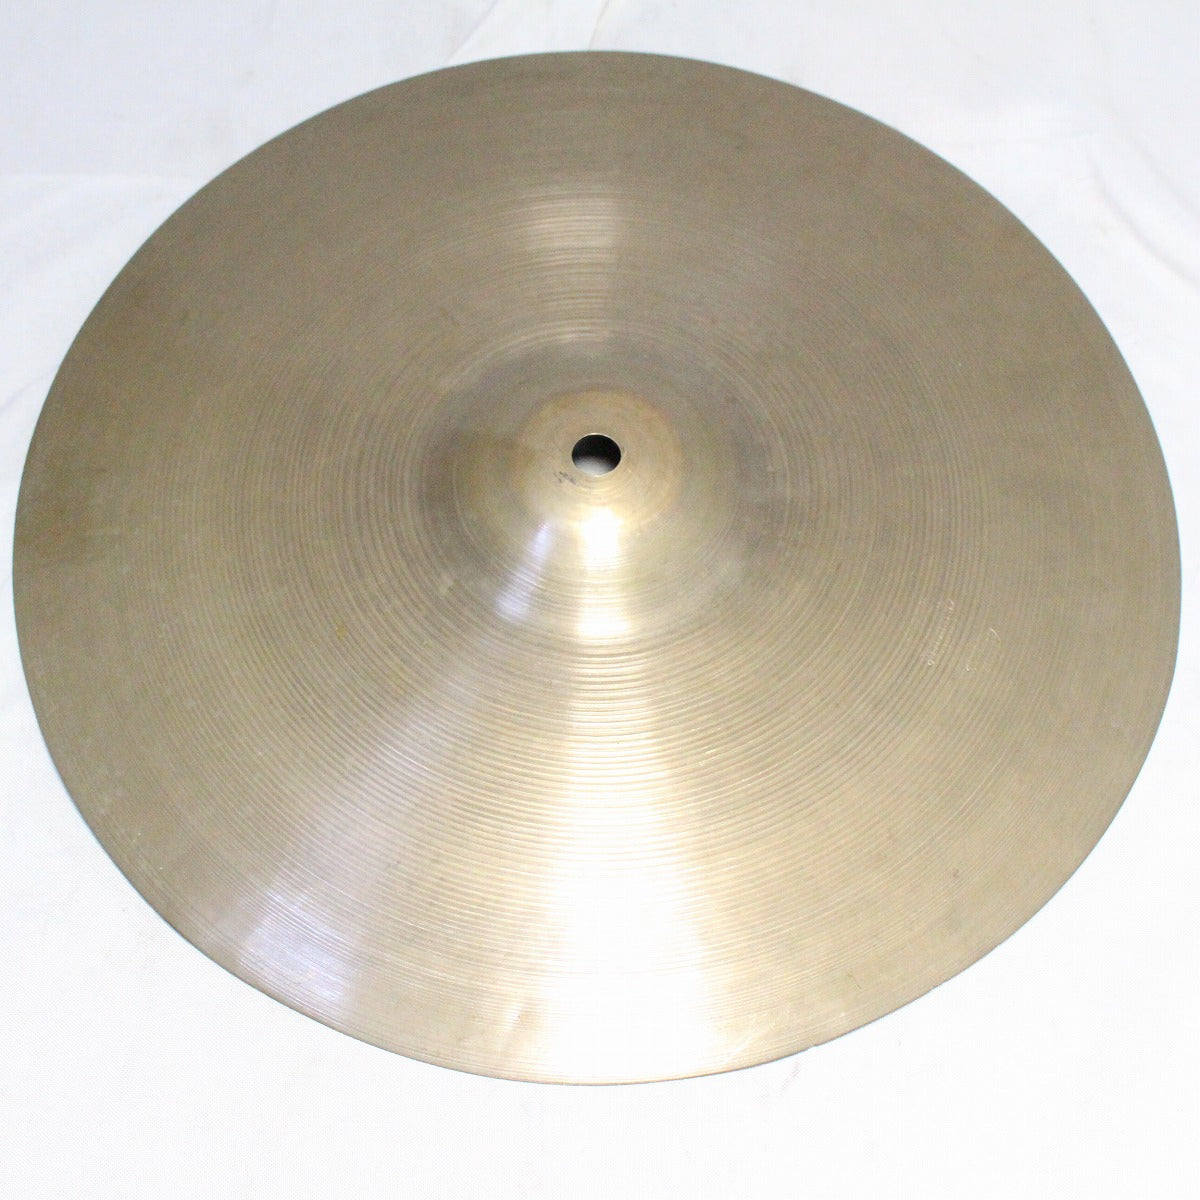 USED ZILDJIAN / A Trans Stamp Type III (1950-52) 14" 706g HiHat Top only [08]